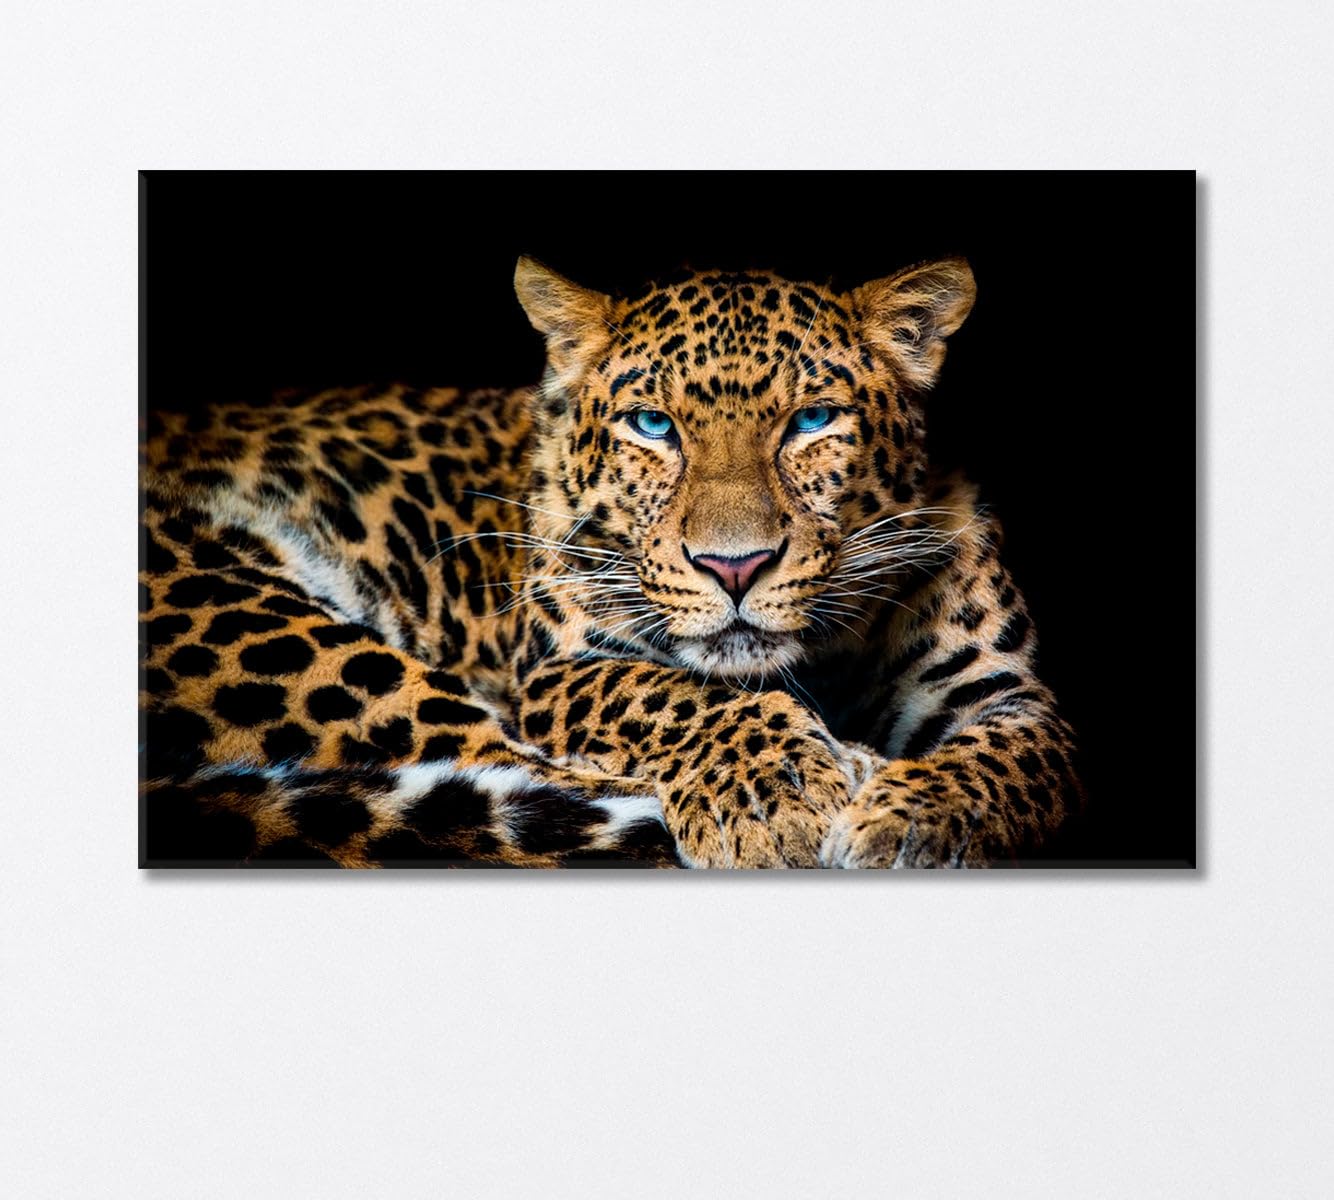 Northern Chinese Leopard with Extraordinary Blue Eyes Canvas Print 5 Panels / 36x24 inches